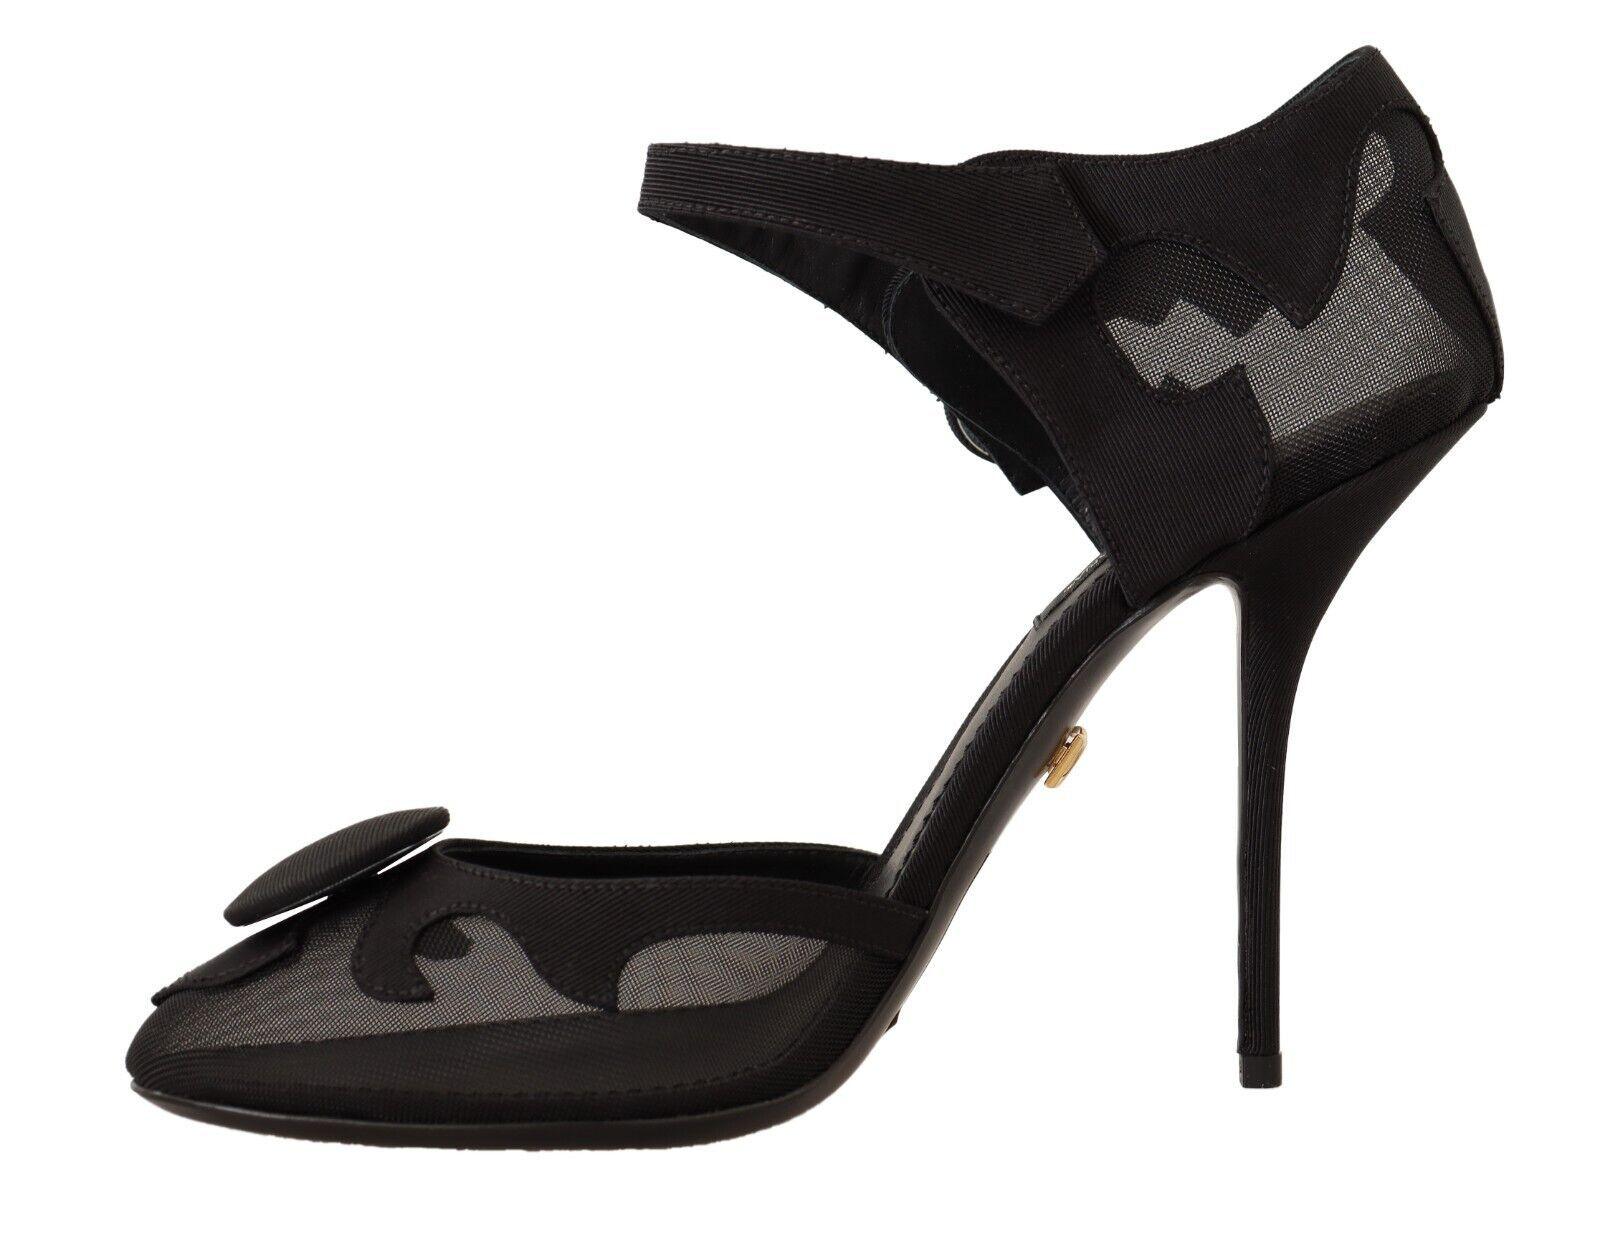 Dolce & Gabbana Black Mesh Ankle Strap Stiletto Pumps Shoes - Designed by Dolce & Gabbana Available to Buy at a Discounted Price on Moon Behind The Hill Online Designer Discount Store